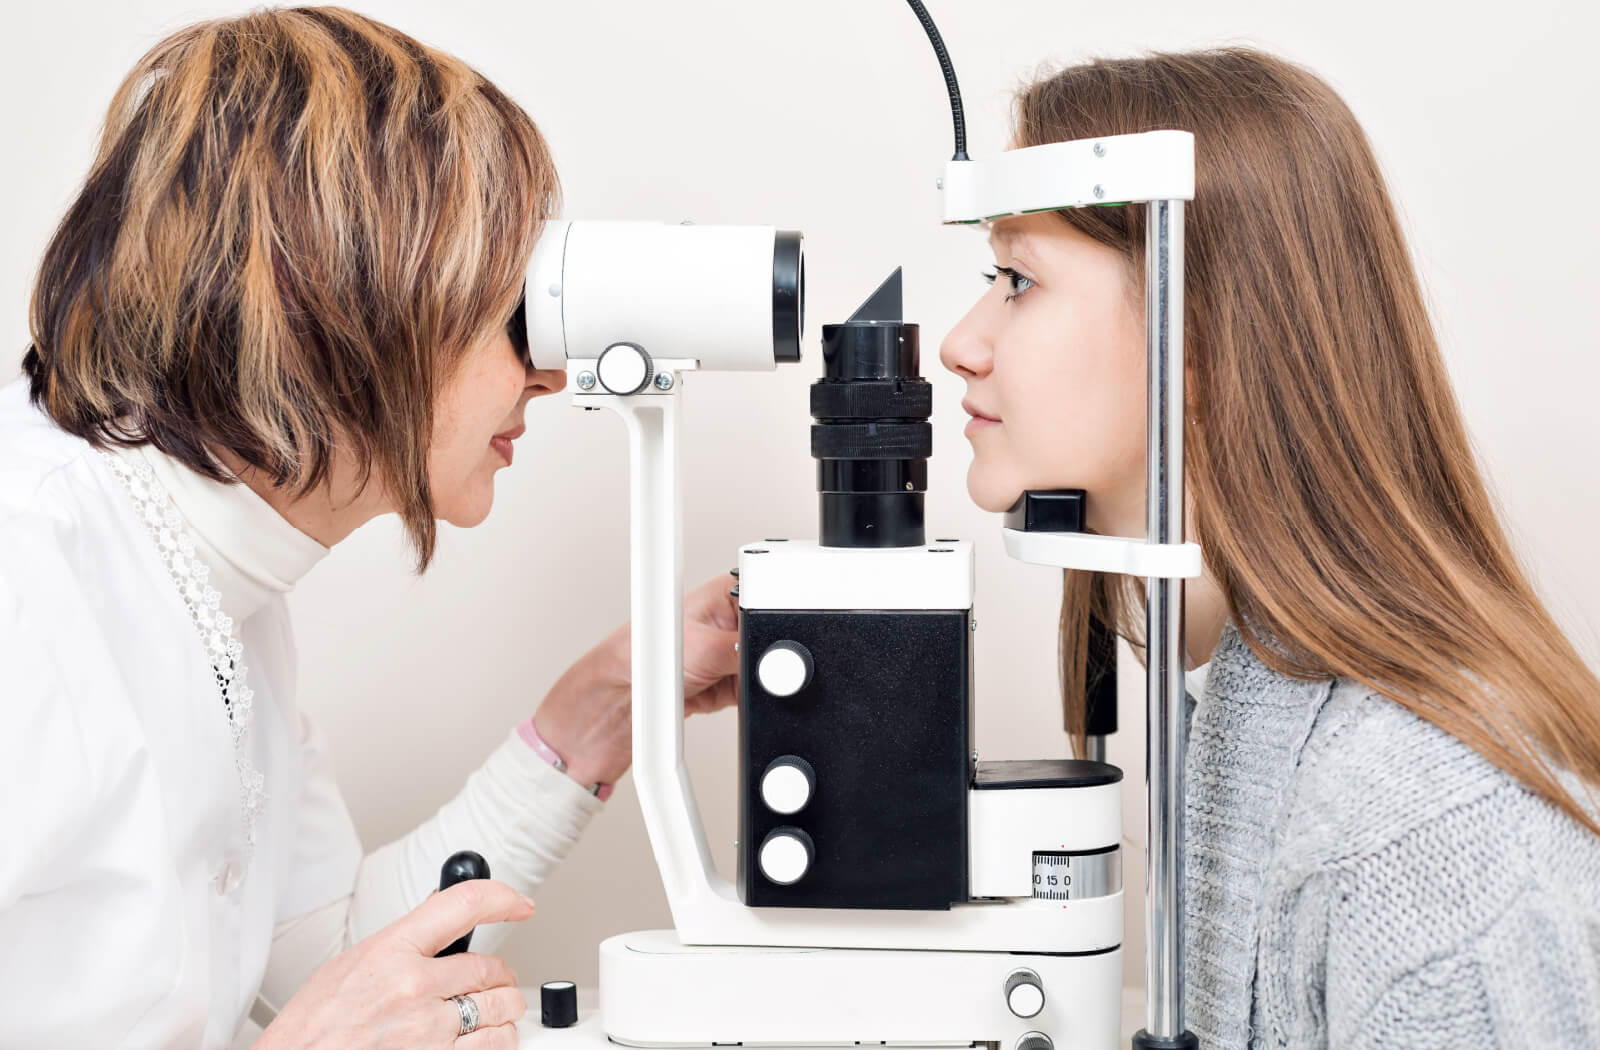 A female optometrist examining the eyes of a young woman using a medical device to detect potential eye problems.